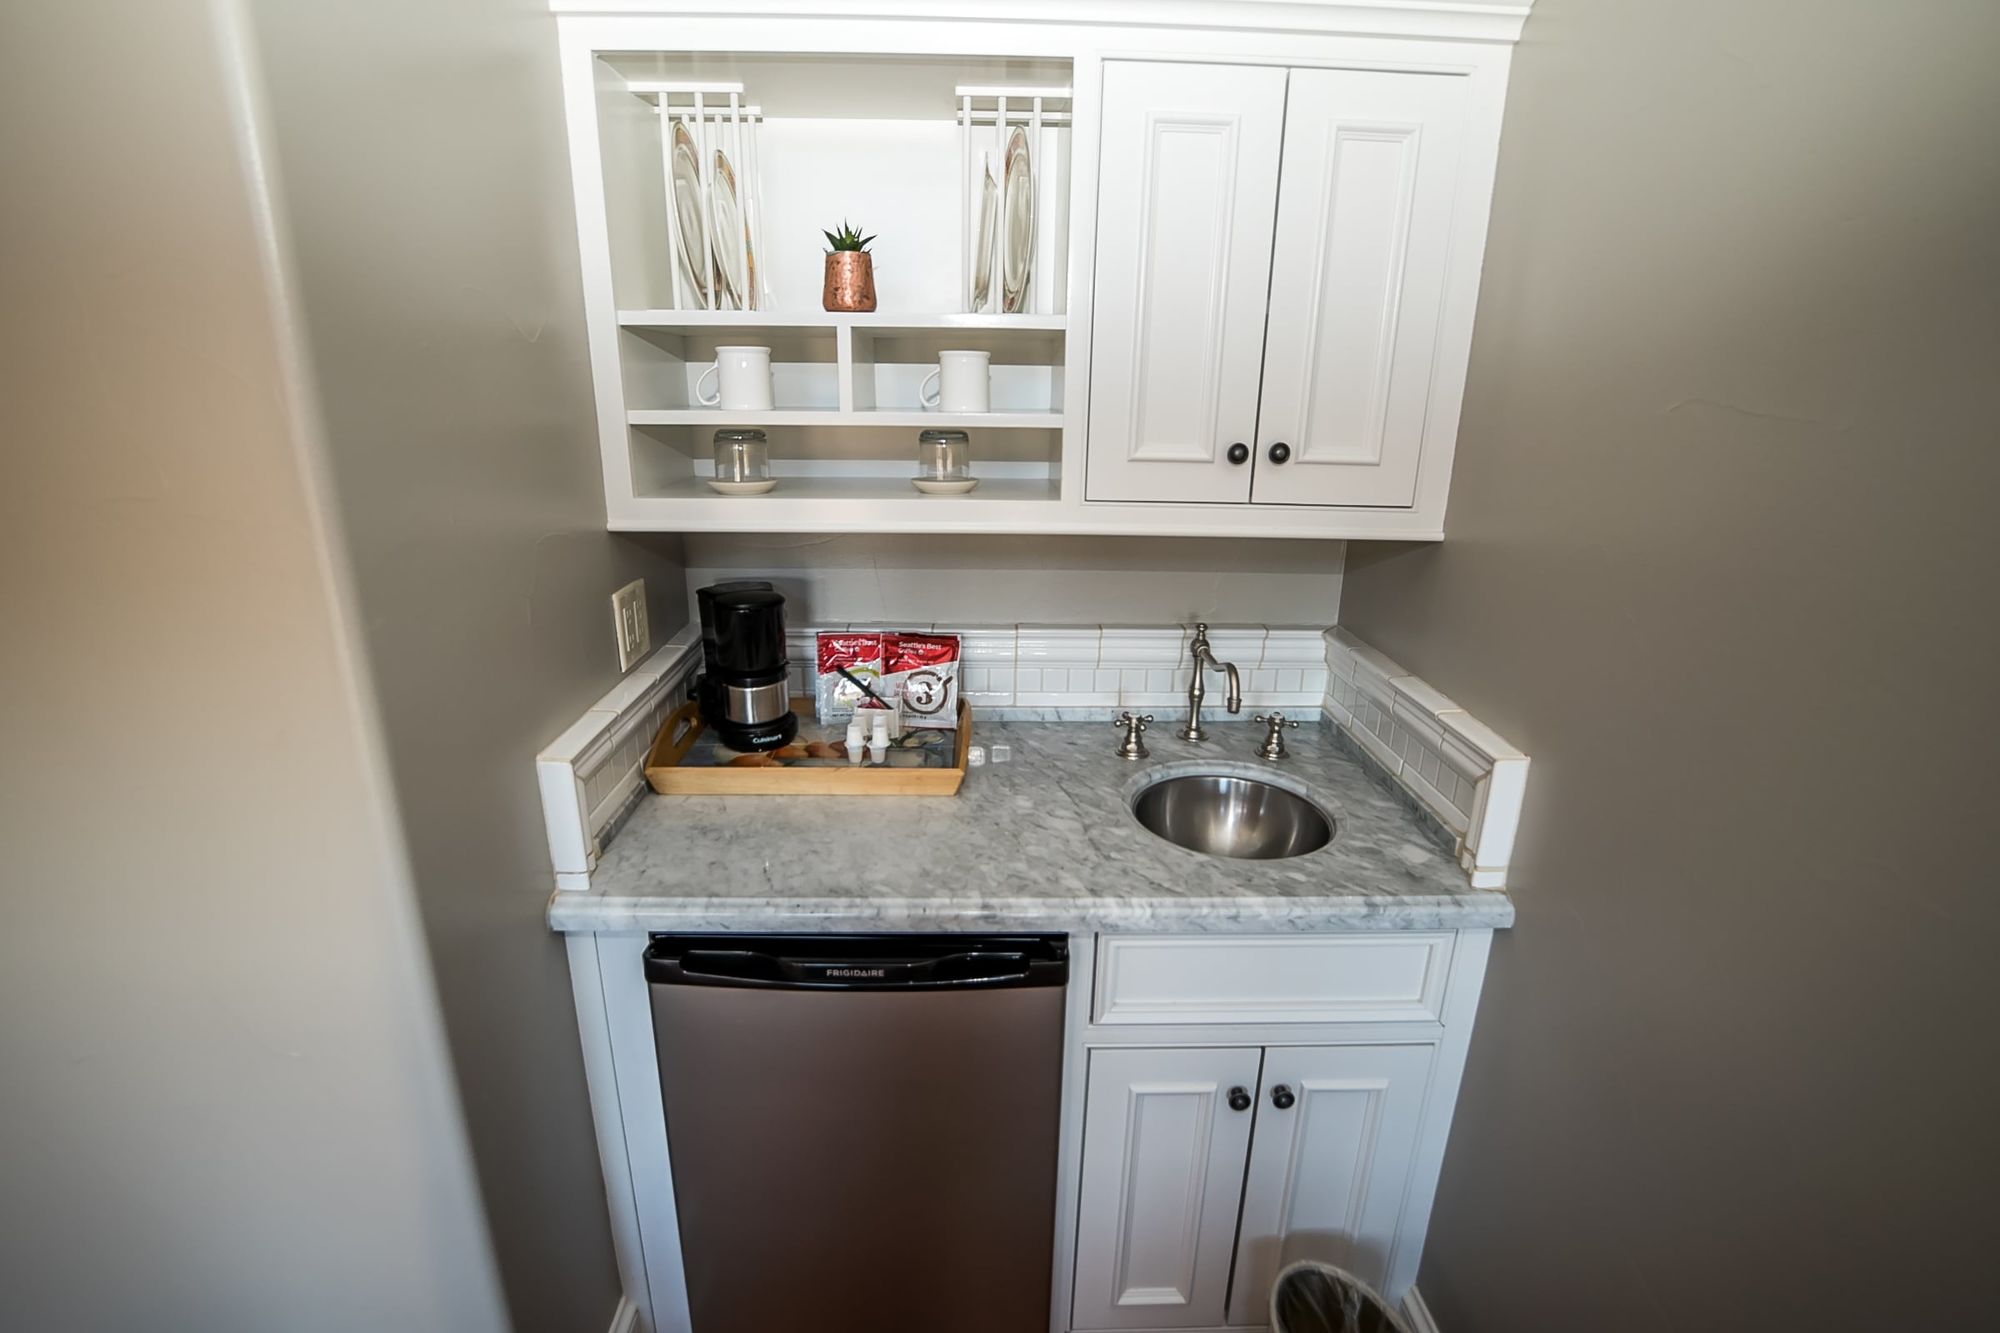 Small wet bar with sink and fridge